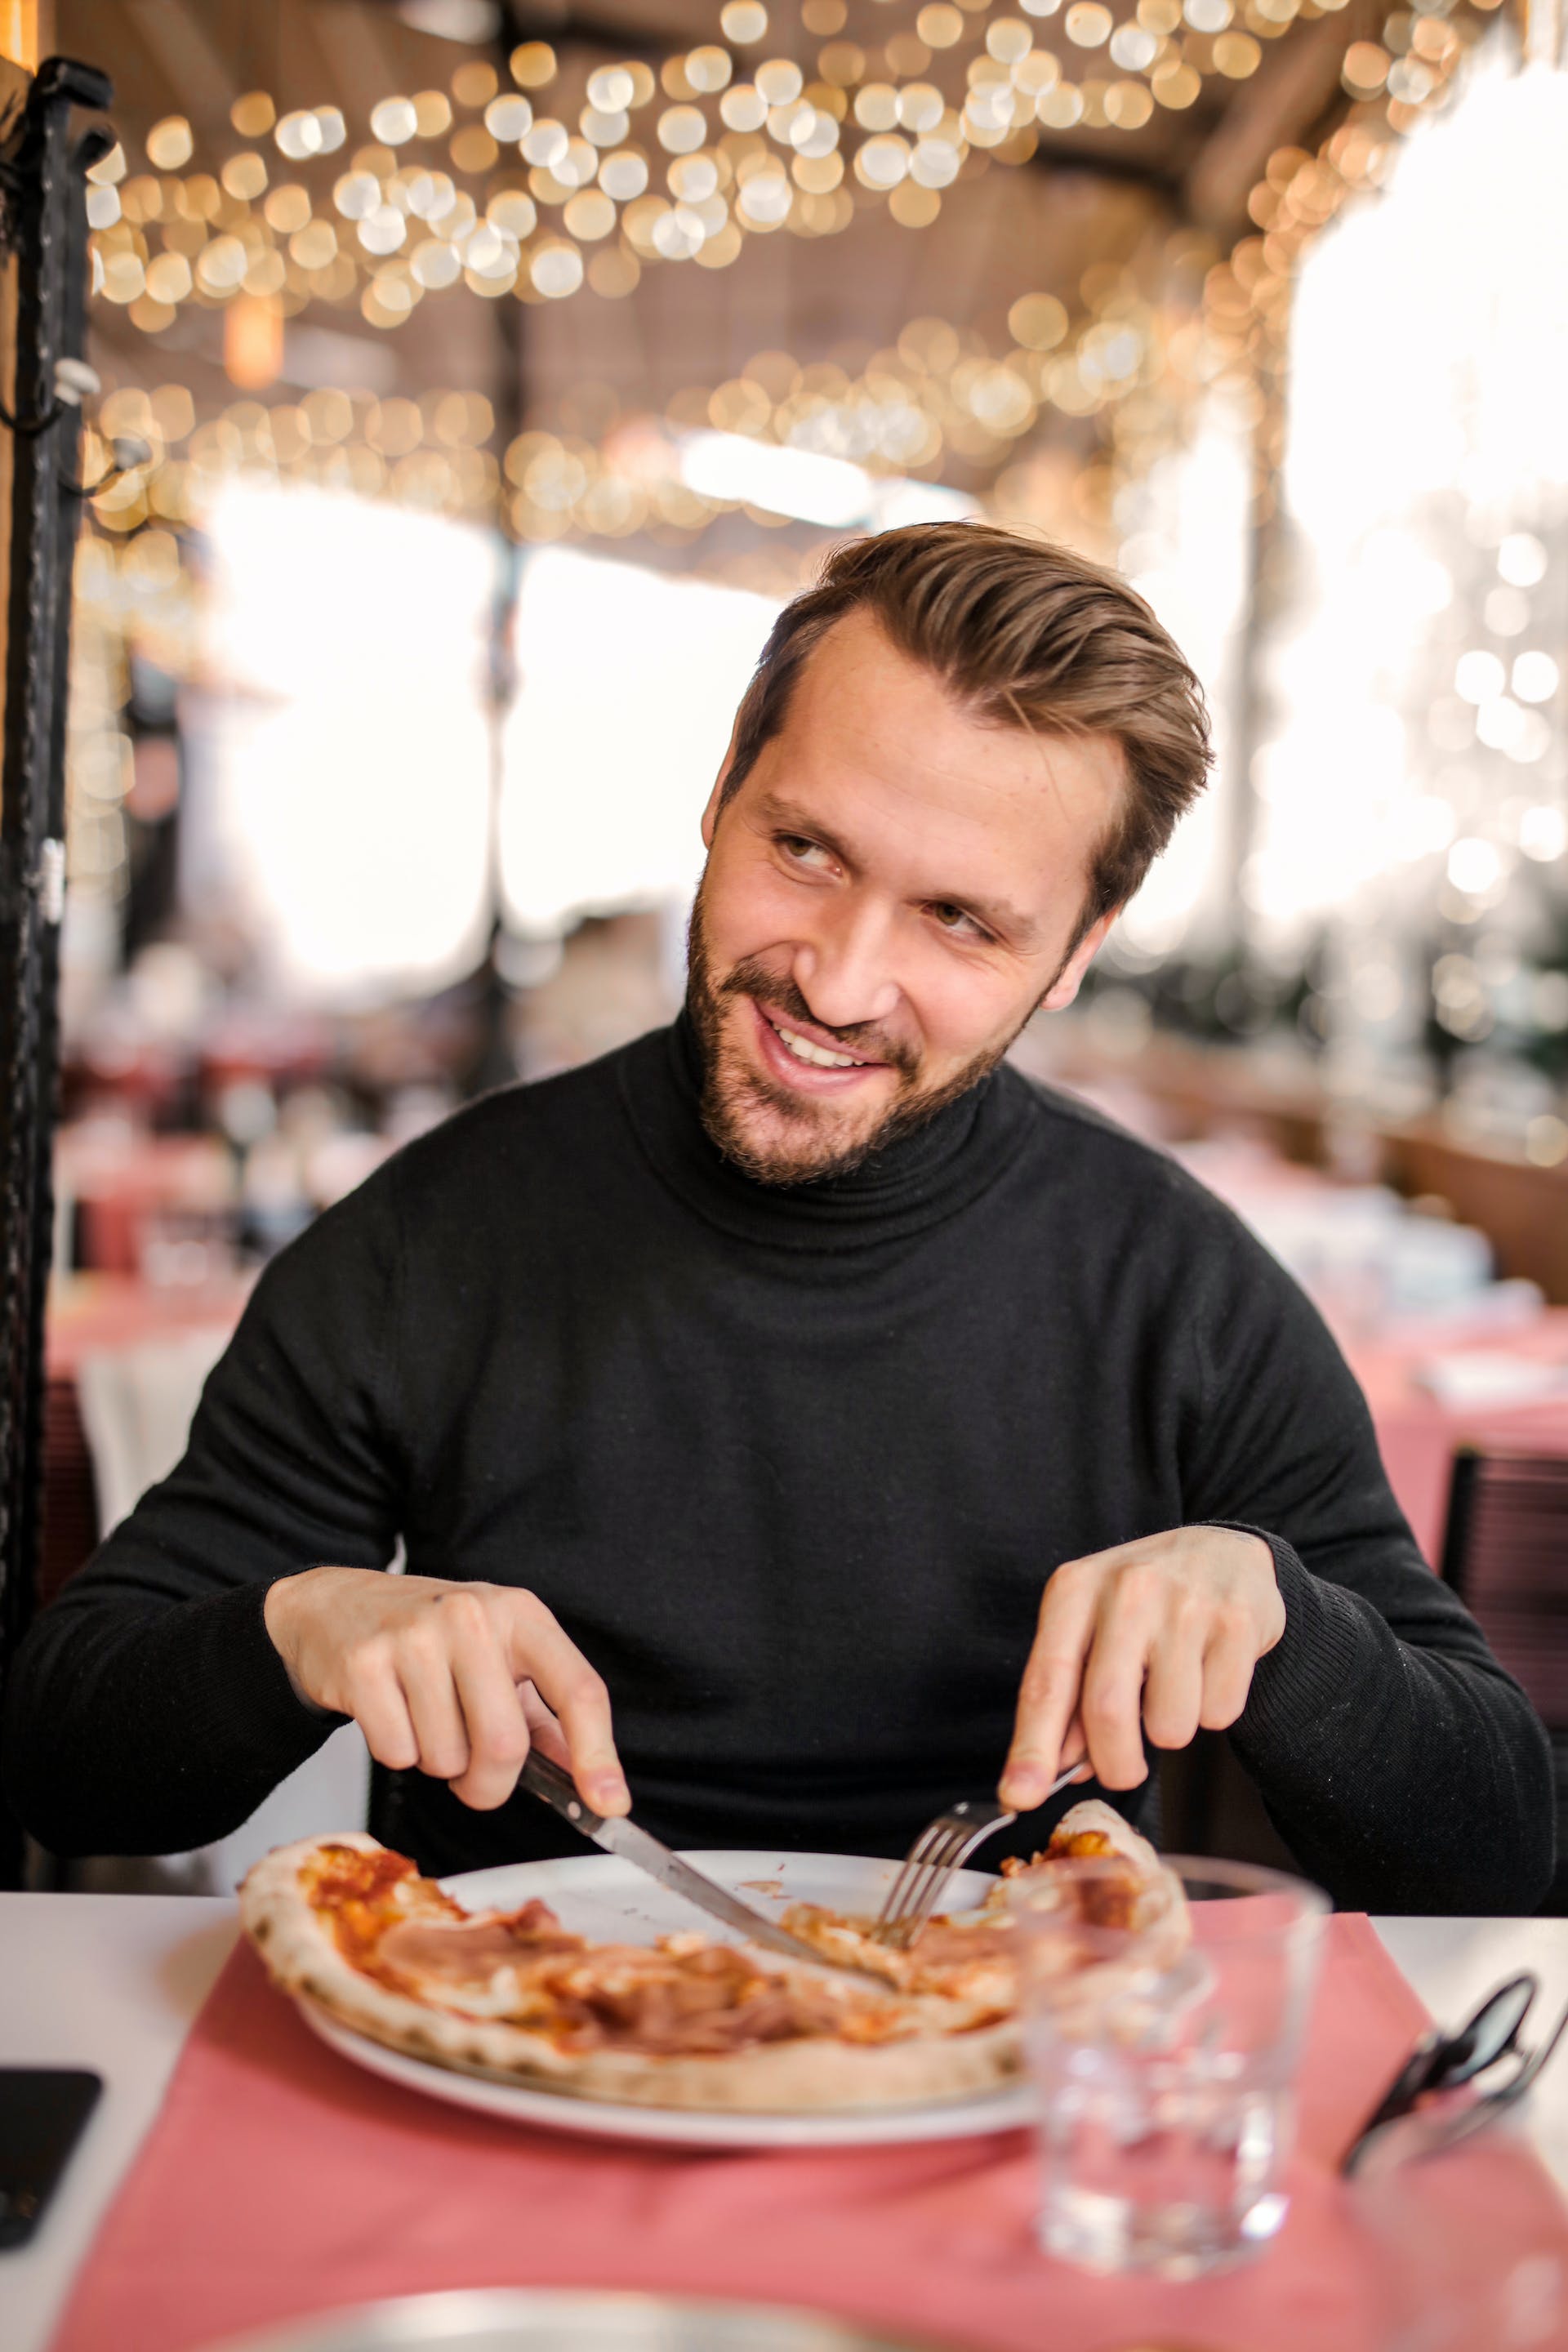 A man eating pizza | Source: Pexels